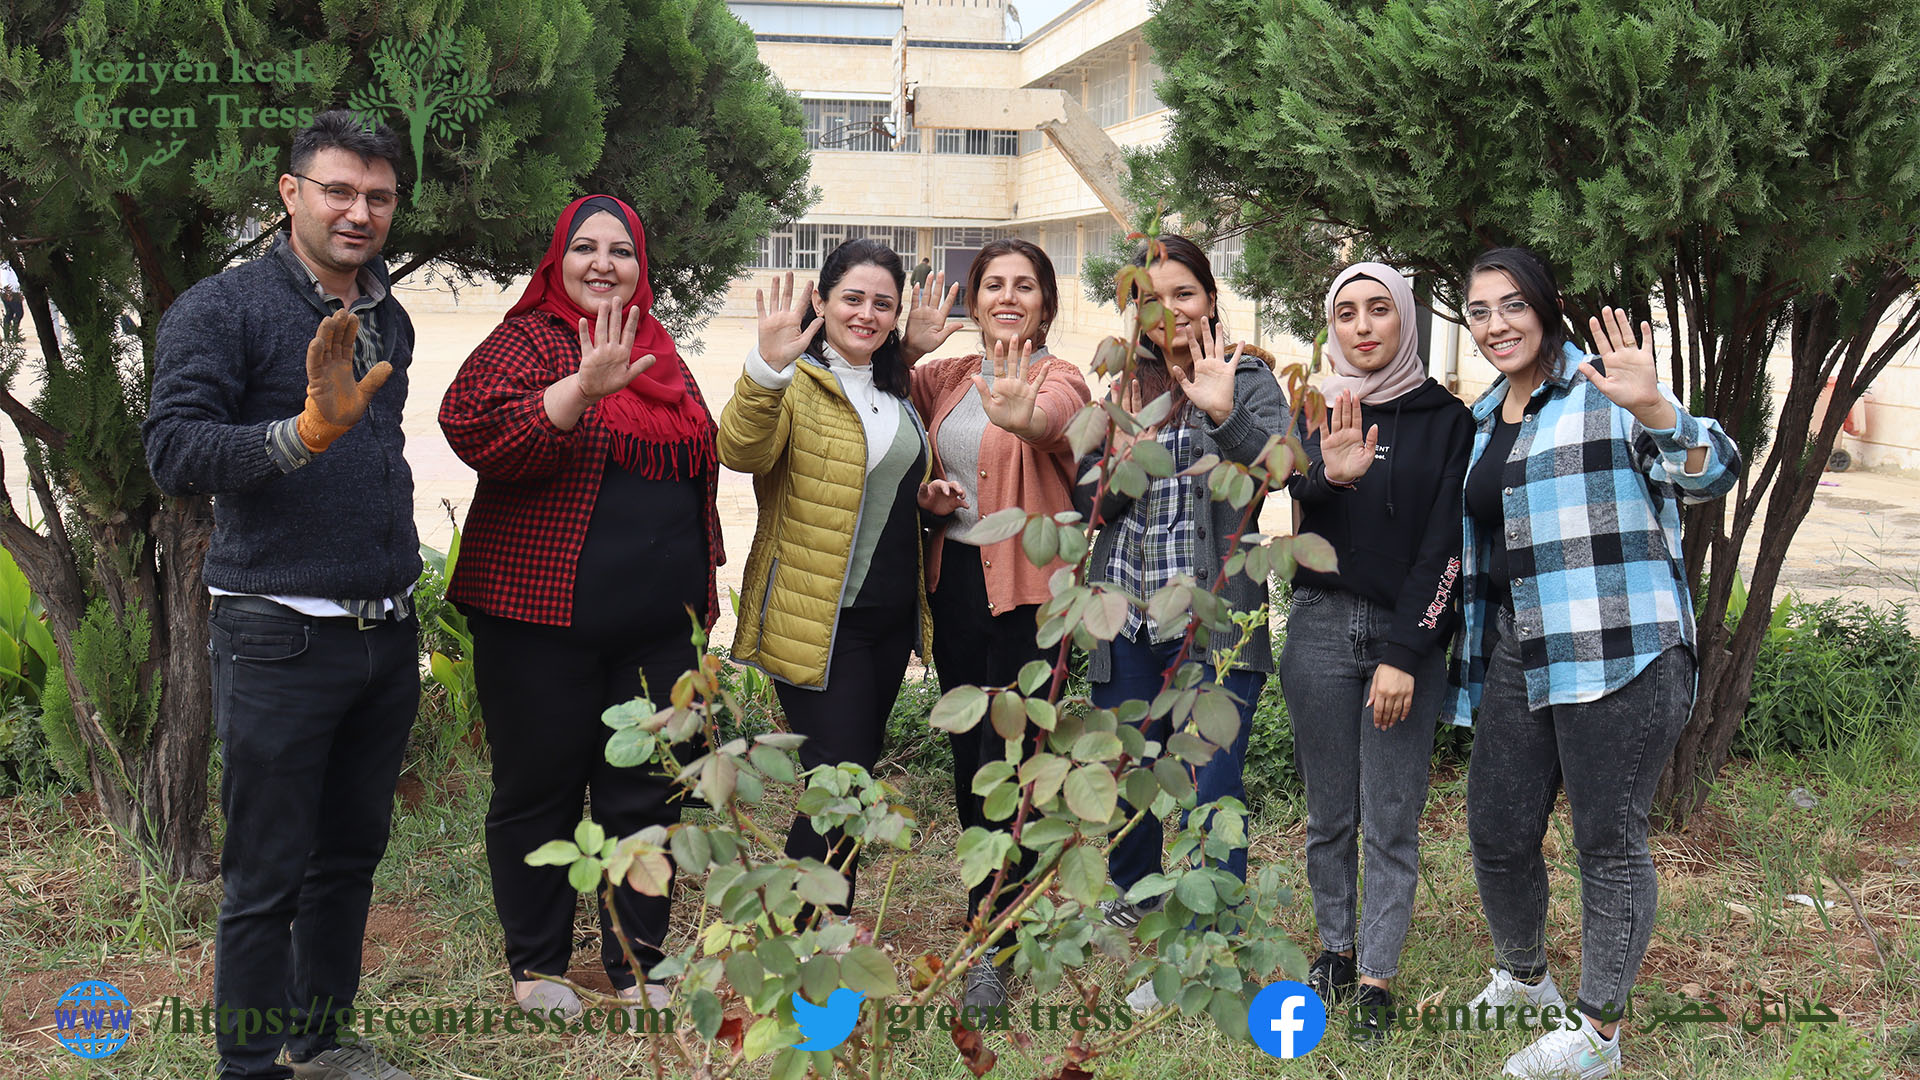 Read more about the article Women’s Environmental Platform with Green trees Association participates in a volunteer day to collect tree seeds